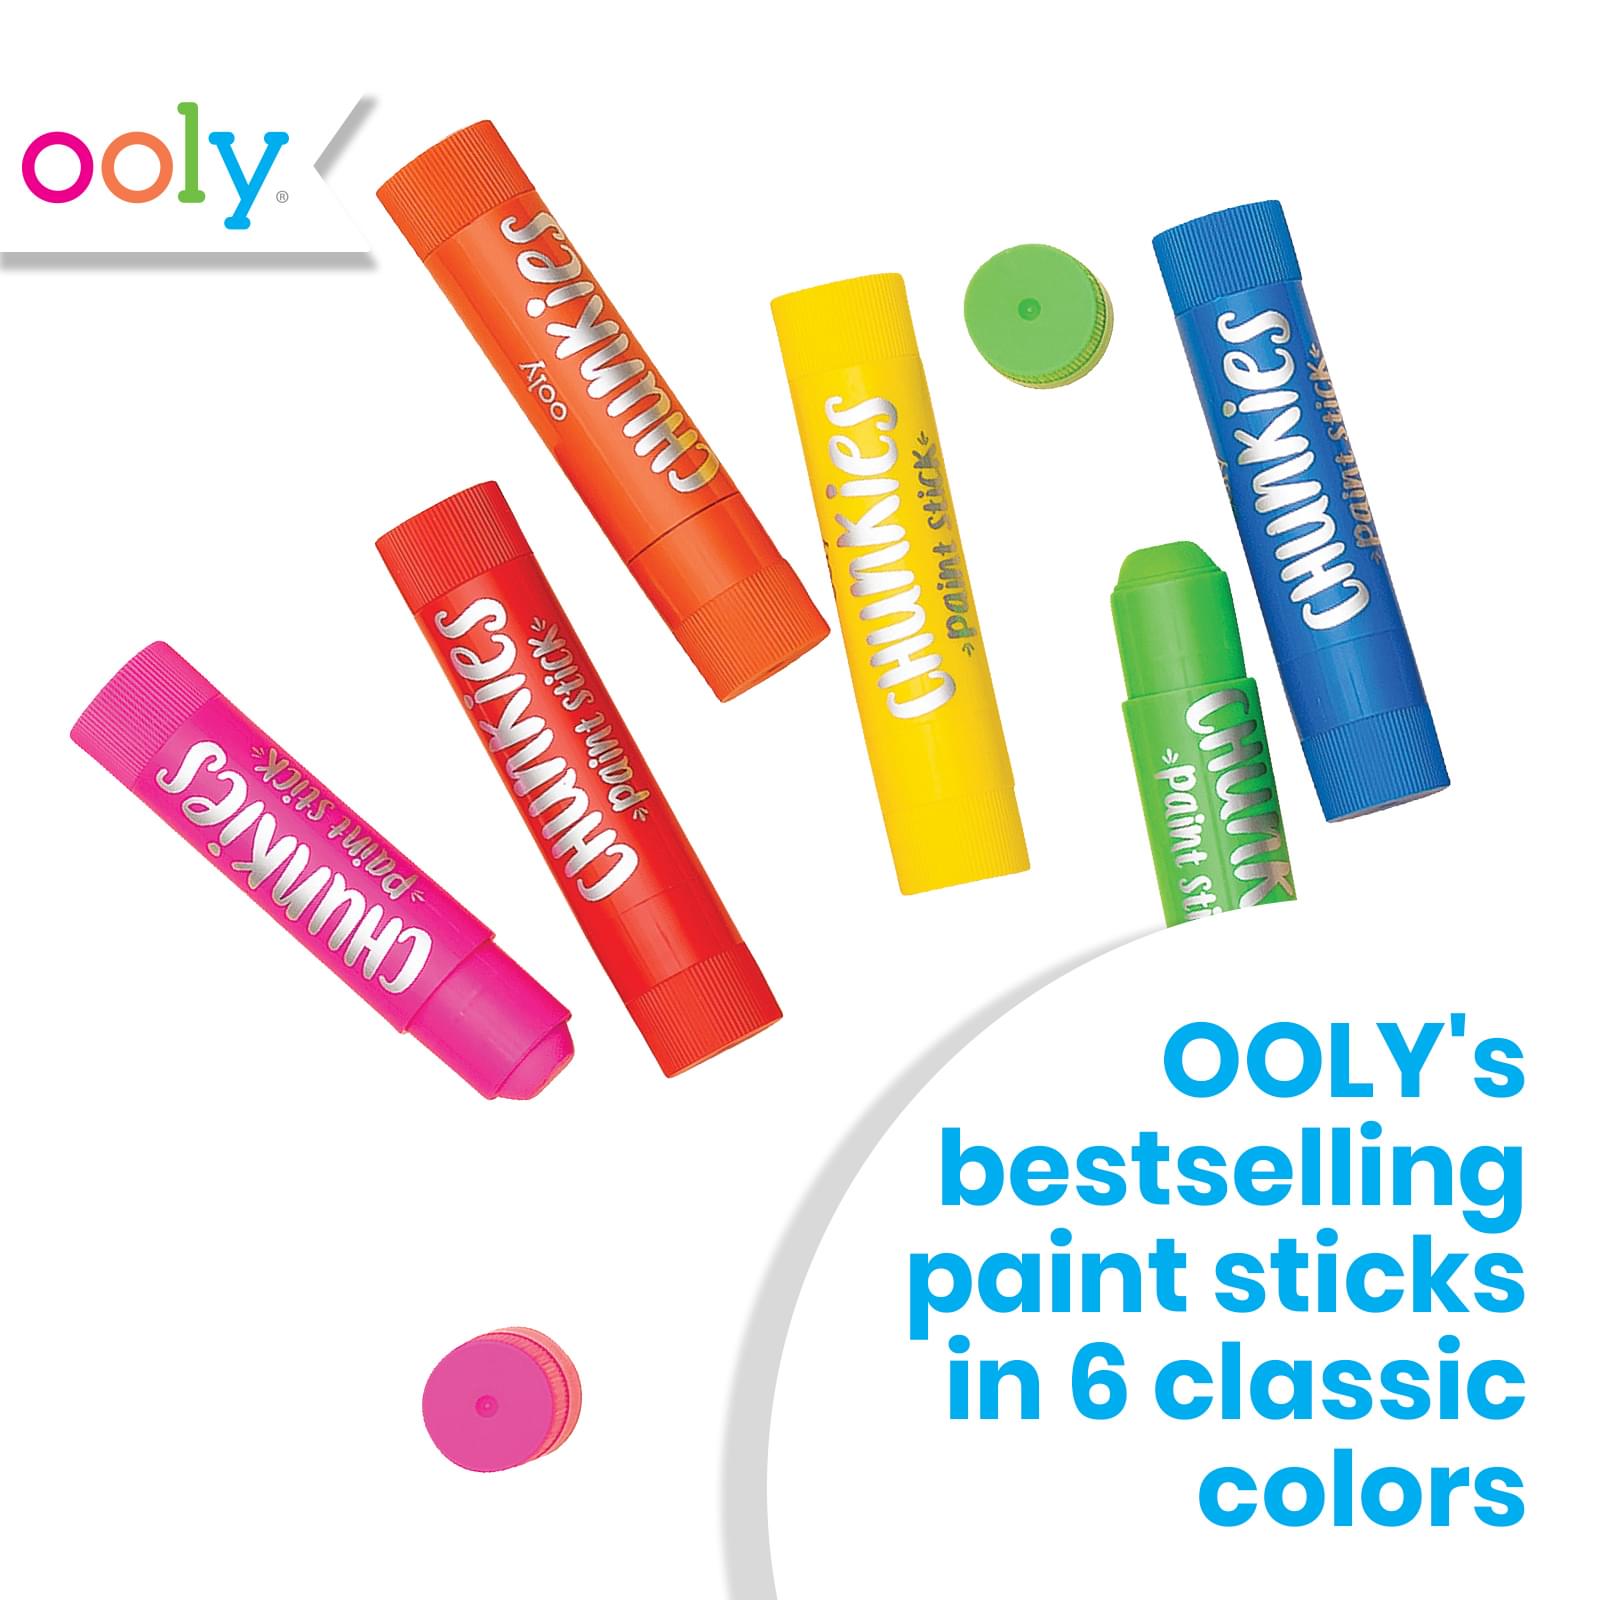 chunkies paint sticks - classic pack - set of 6 | OOLY